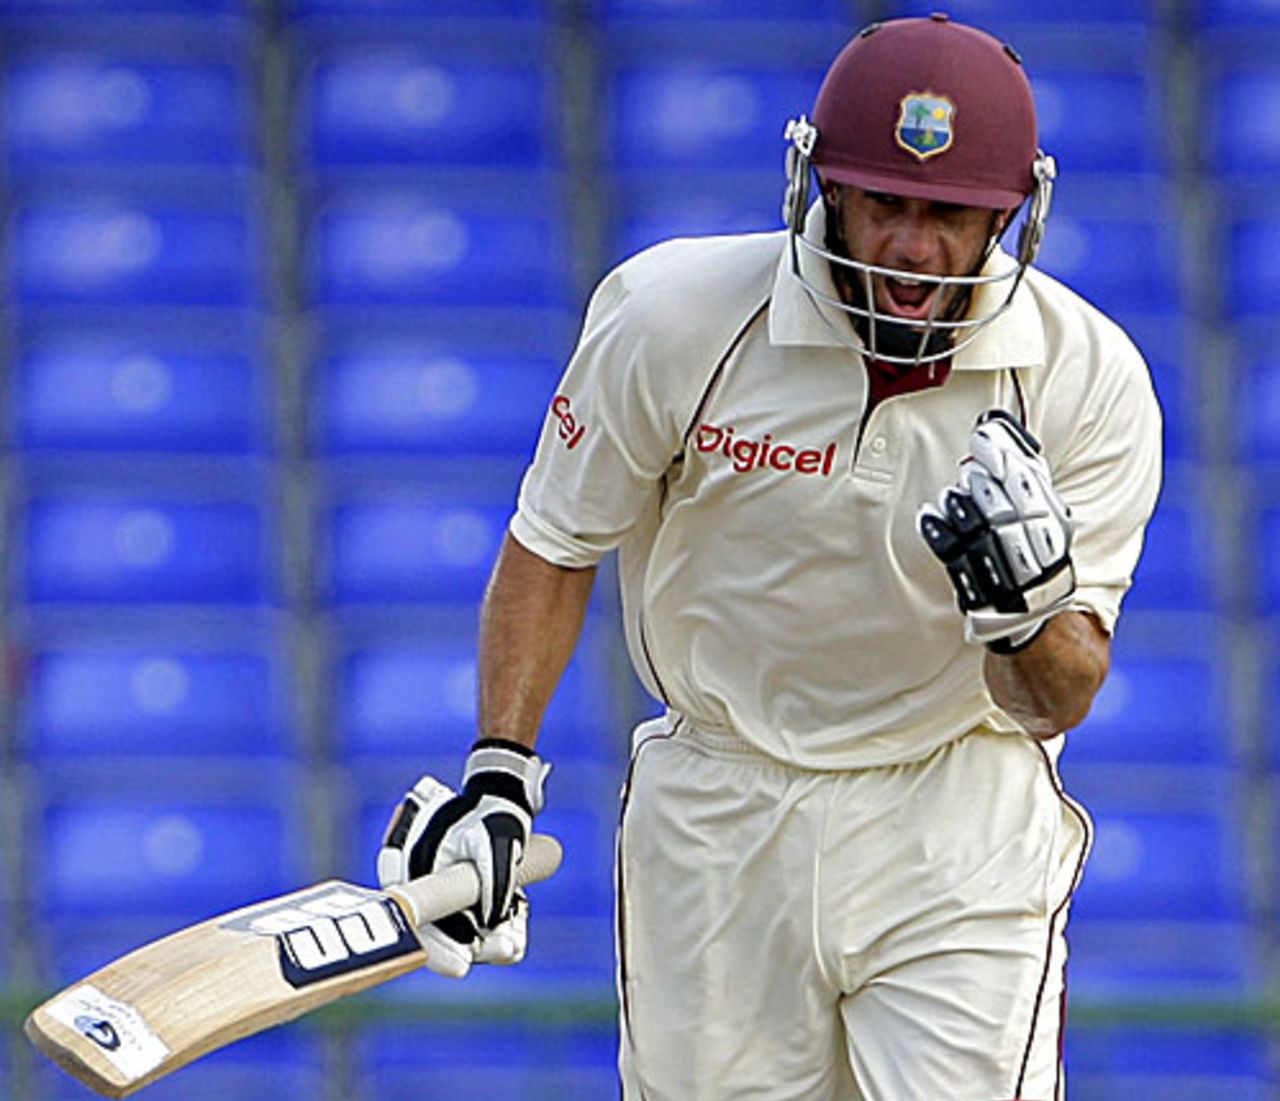 Brendan Nash is chuffed after reaching his second Test century, West Indies v South Africa, 2nd Test, St Kitts, 3rd day, June 20, 2010